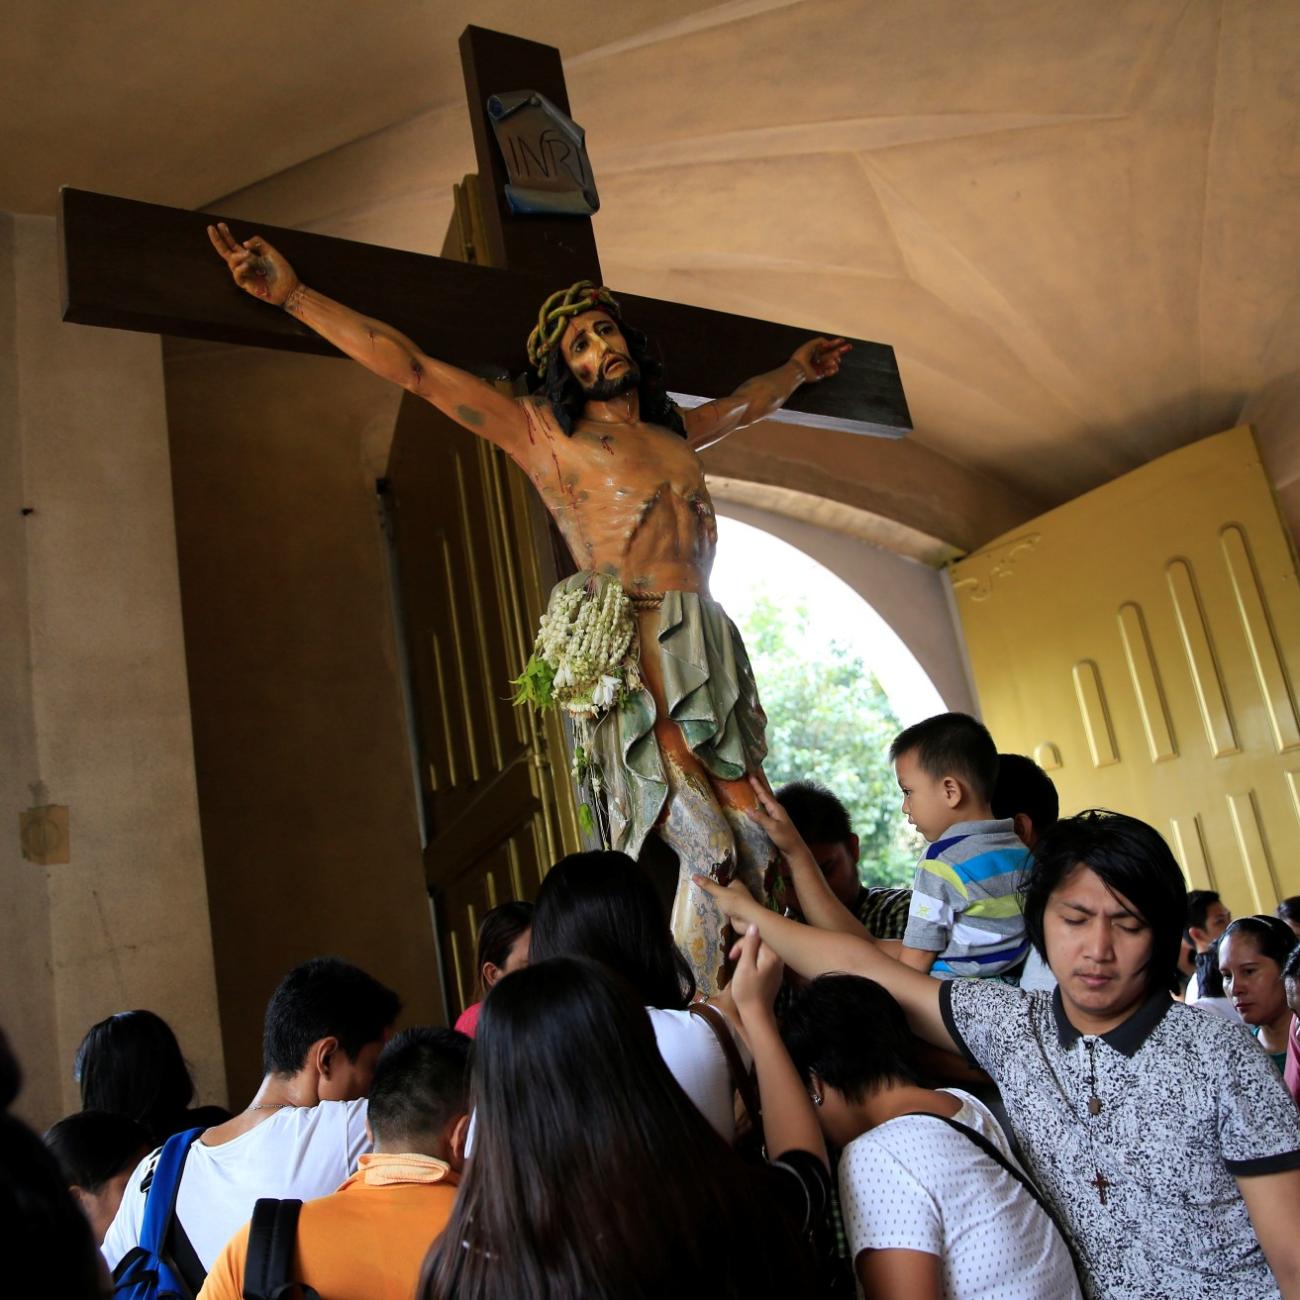 Filipino Catholic devotees touch the statue of crucified Jesus Christ after attending a mass at a National Shrine of Our Mother of Perpetual Help in Baclaran, Paranaque city, metro Manila, Philippines September 18, 2016.